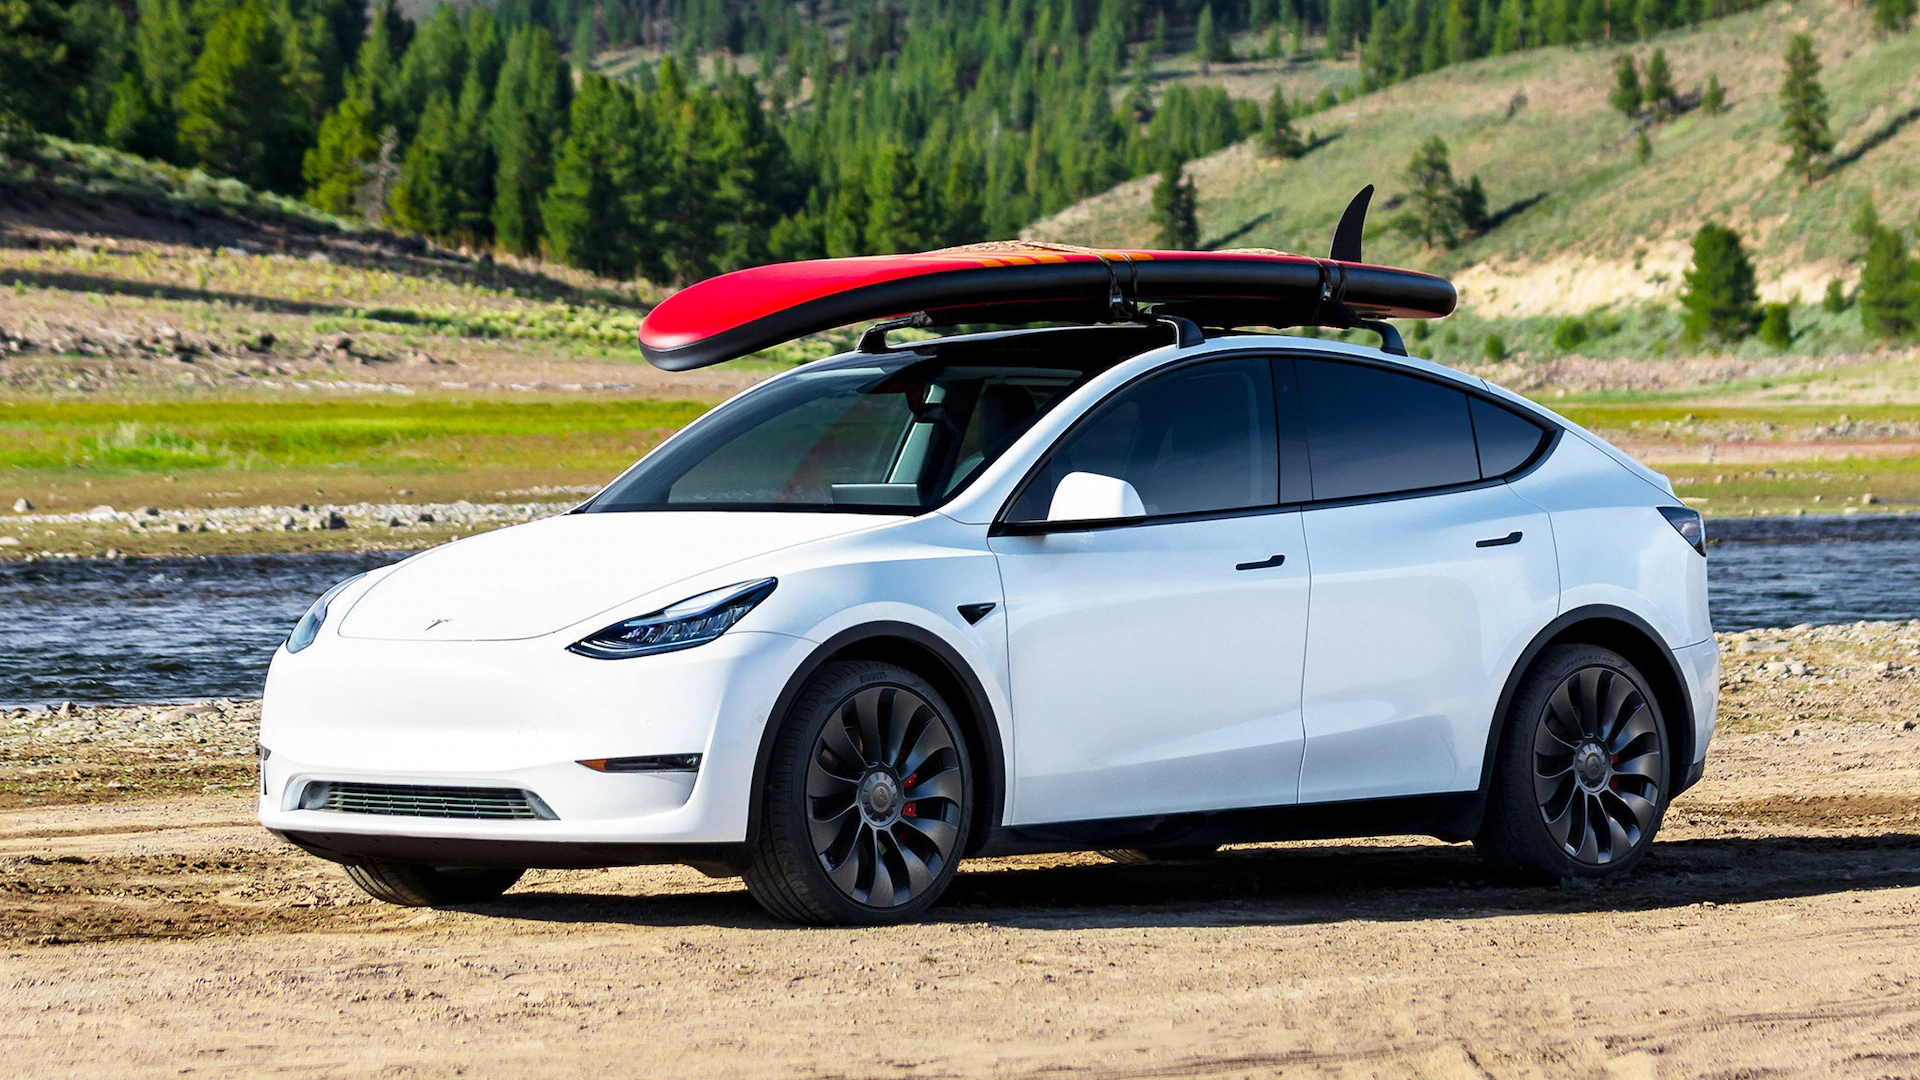 Elon Musk Announces No New Tesla Model Y Upgrade This Year, Will This Decision Upset Millions of EV Fans